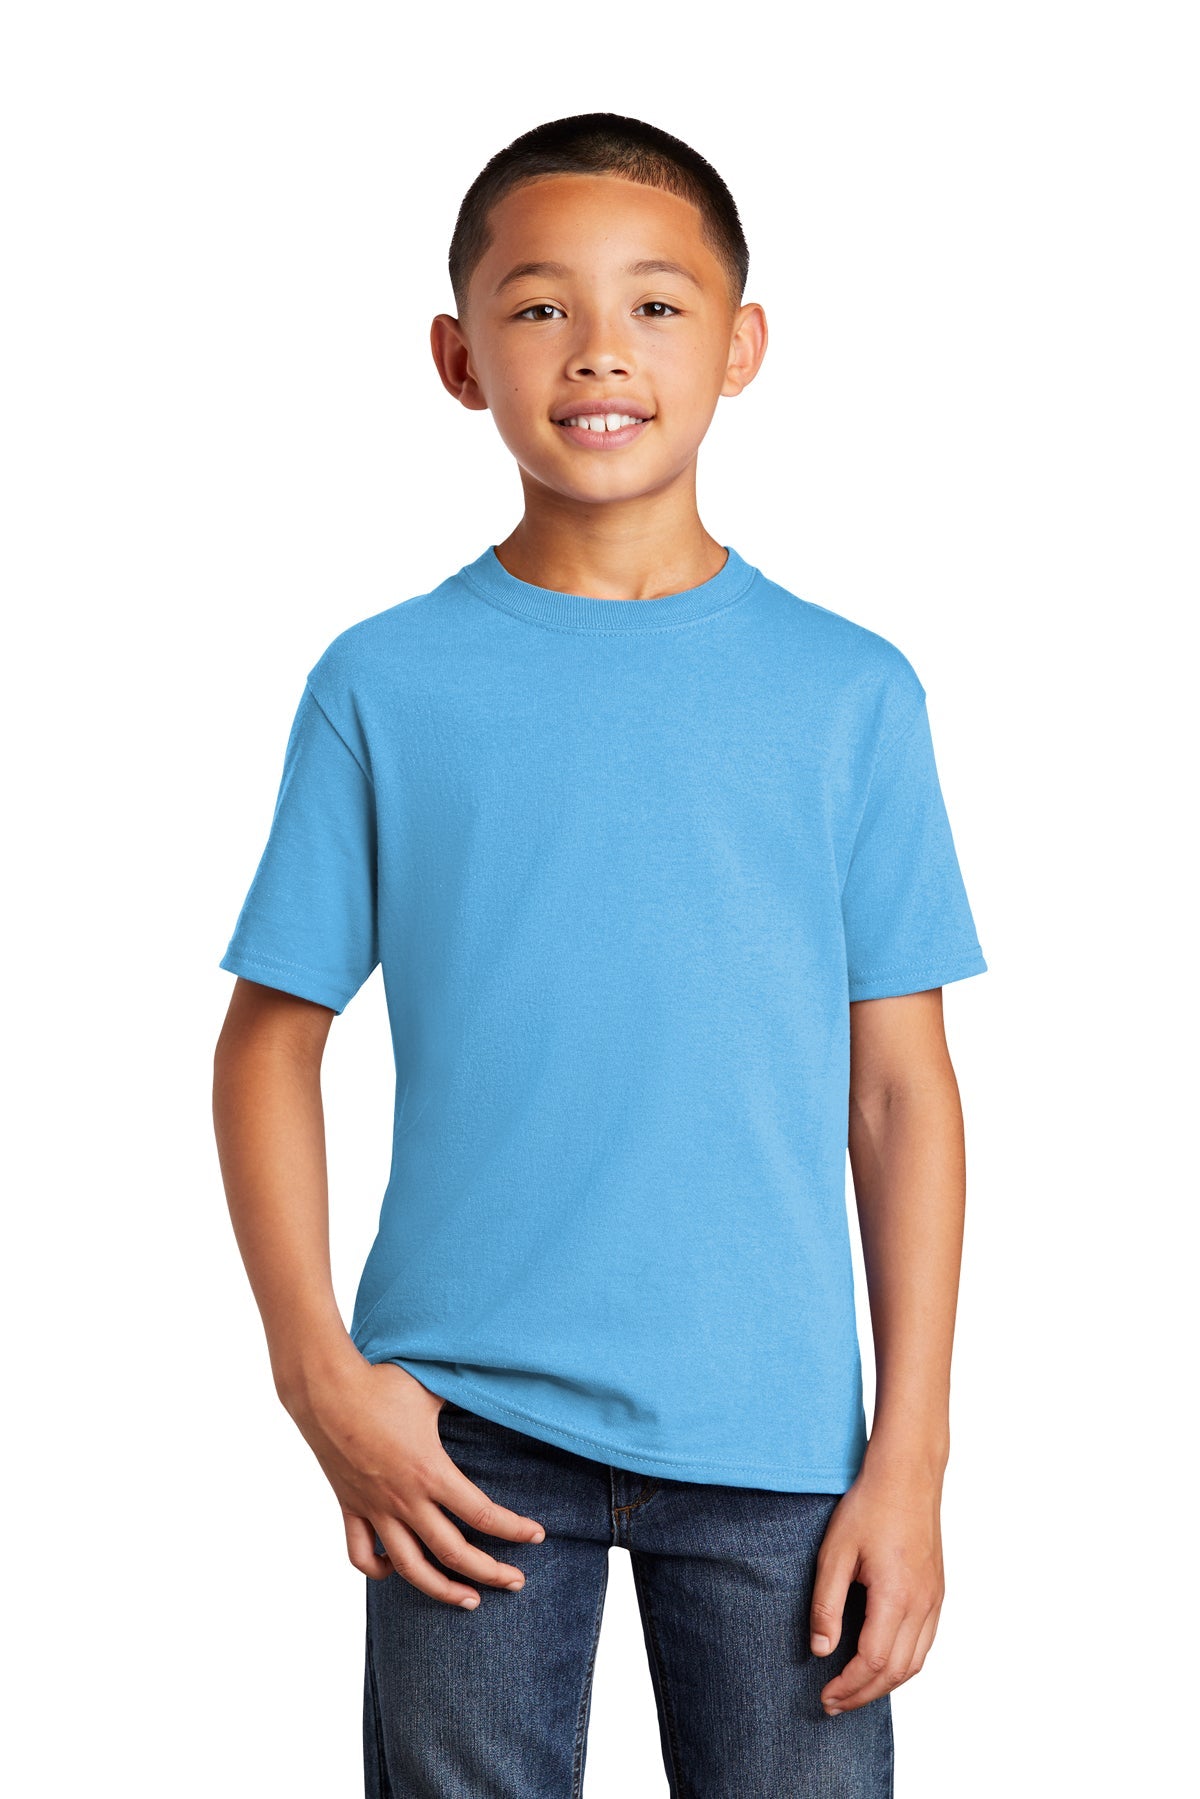 Port & Company® Youth Core Cotton DTG Tee - BT Imprintables Shirts